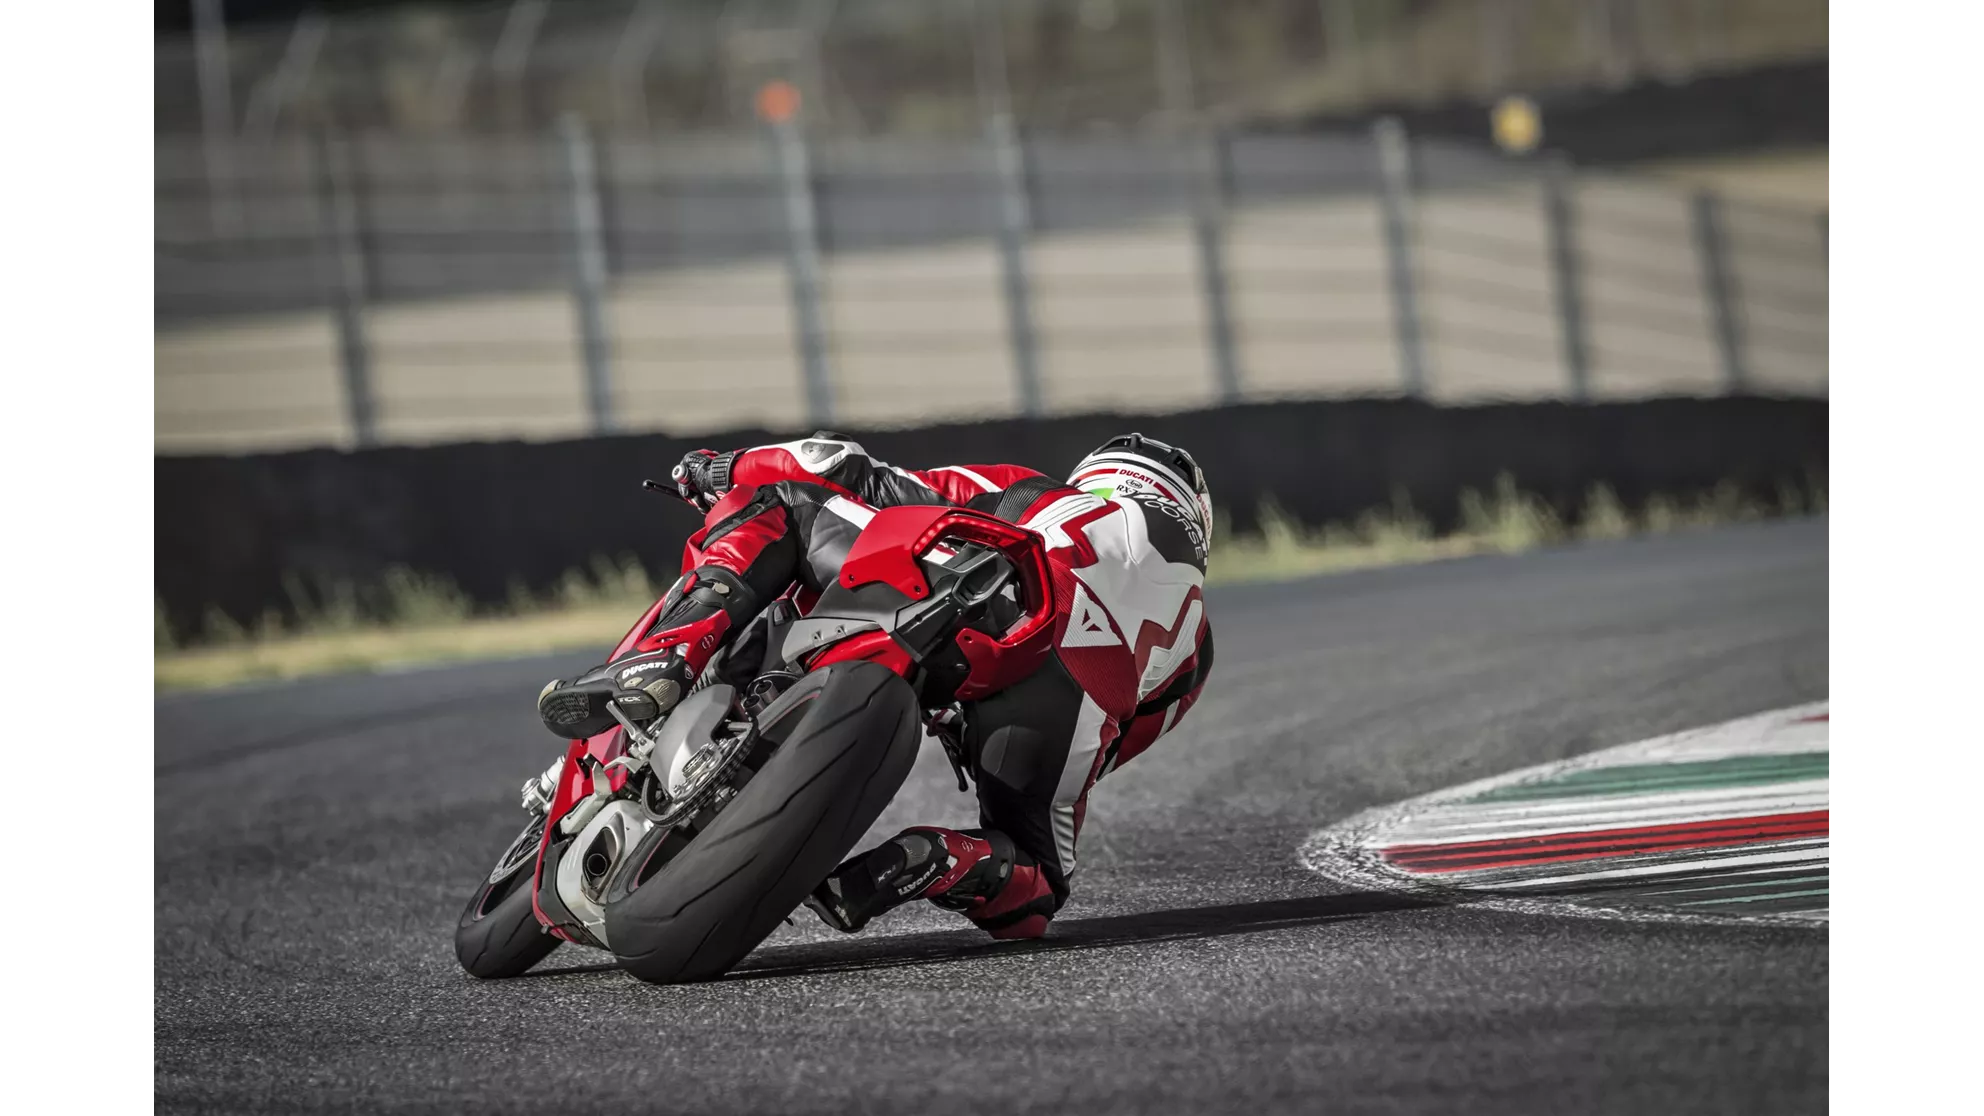 Ducati Panigale V4 Speciale - Image 5